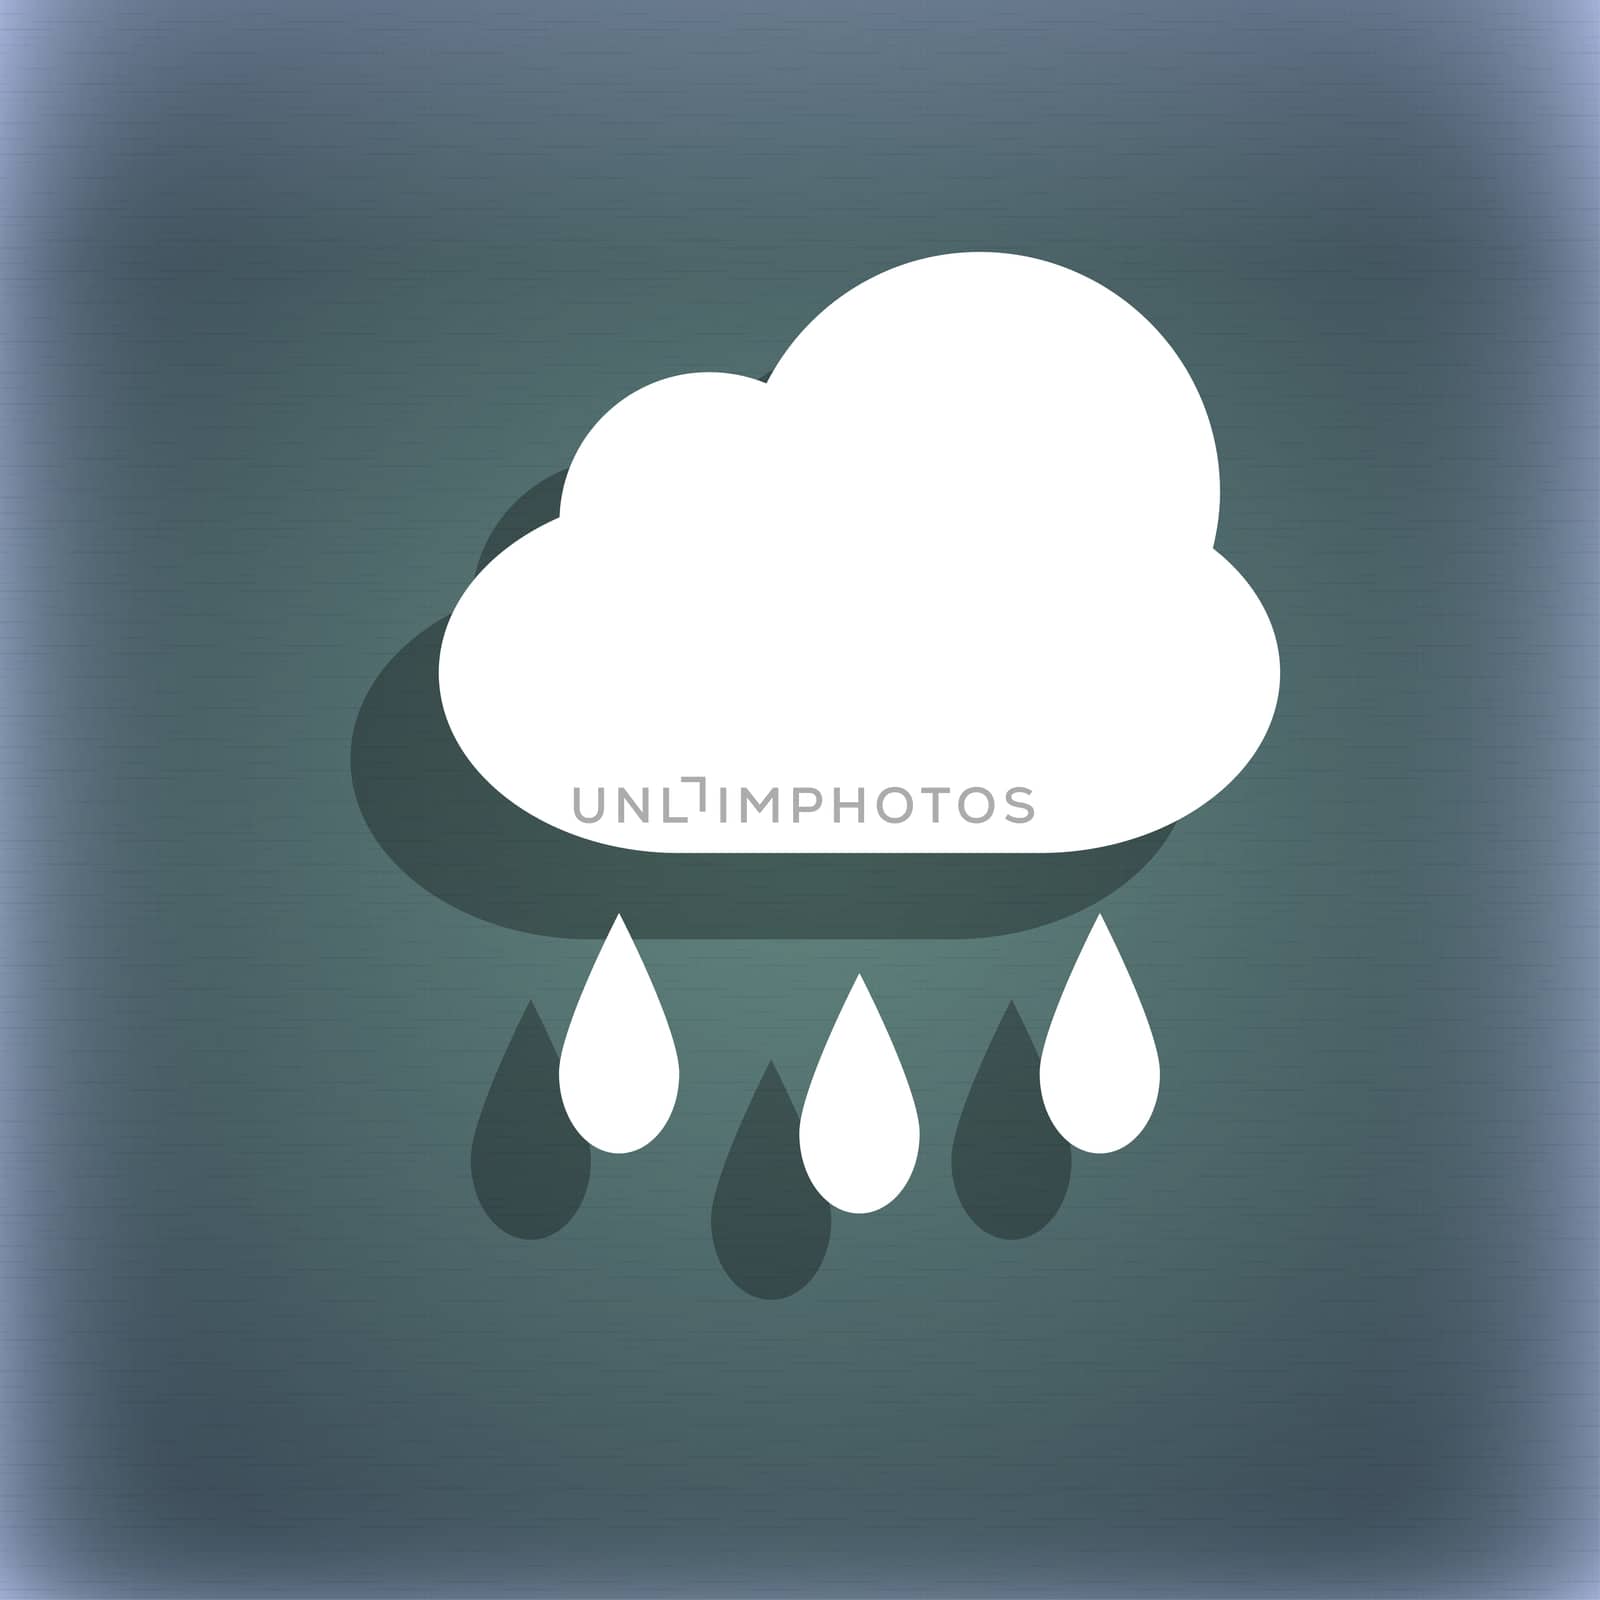 Weather Rain icon symbol on the blue-green abstract background with shadow and space for your text. illustration